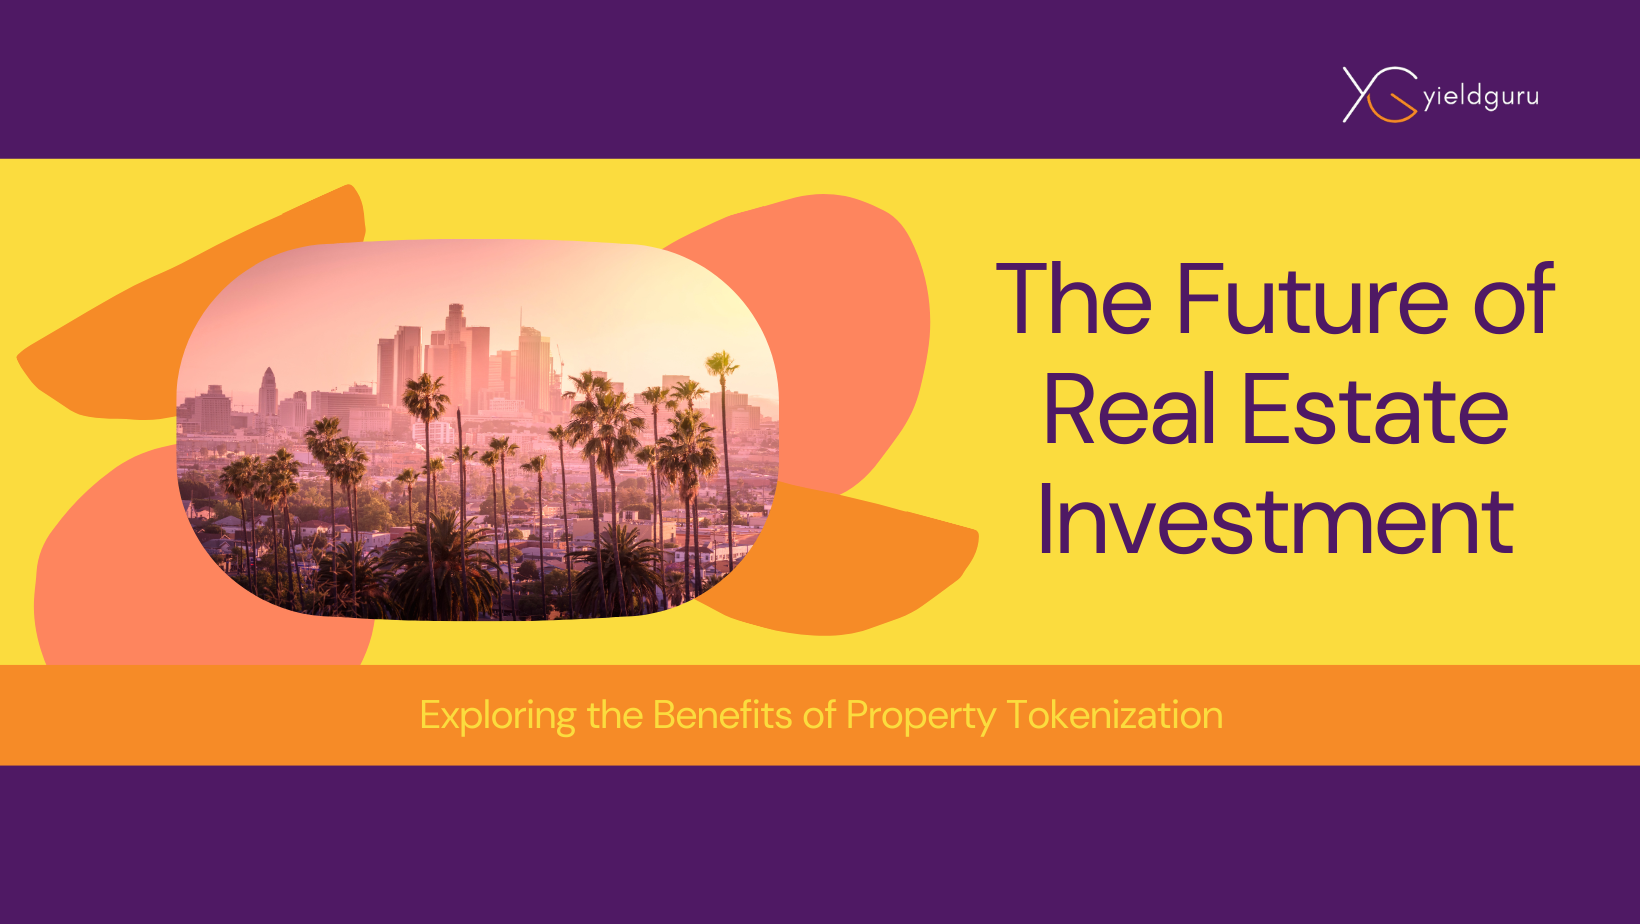 The Future of Real Estate Investment: Exploring Property Tokenization